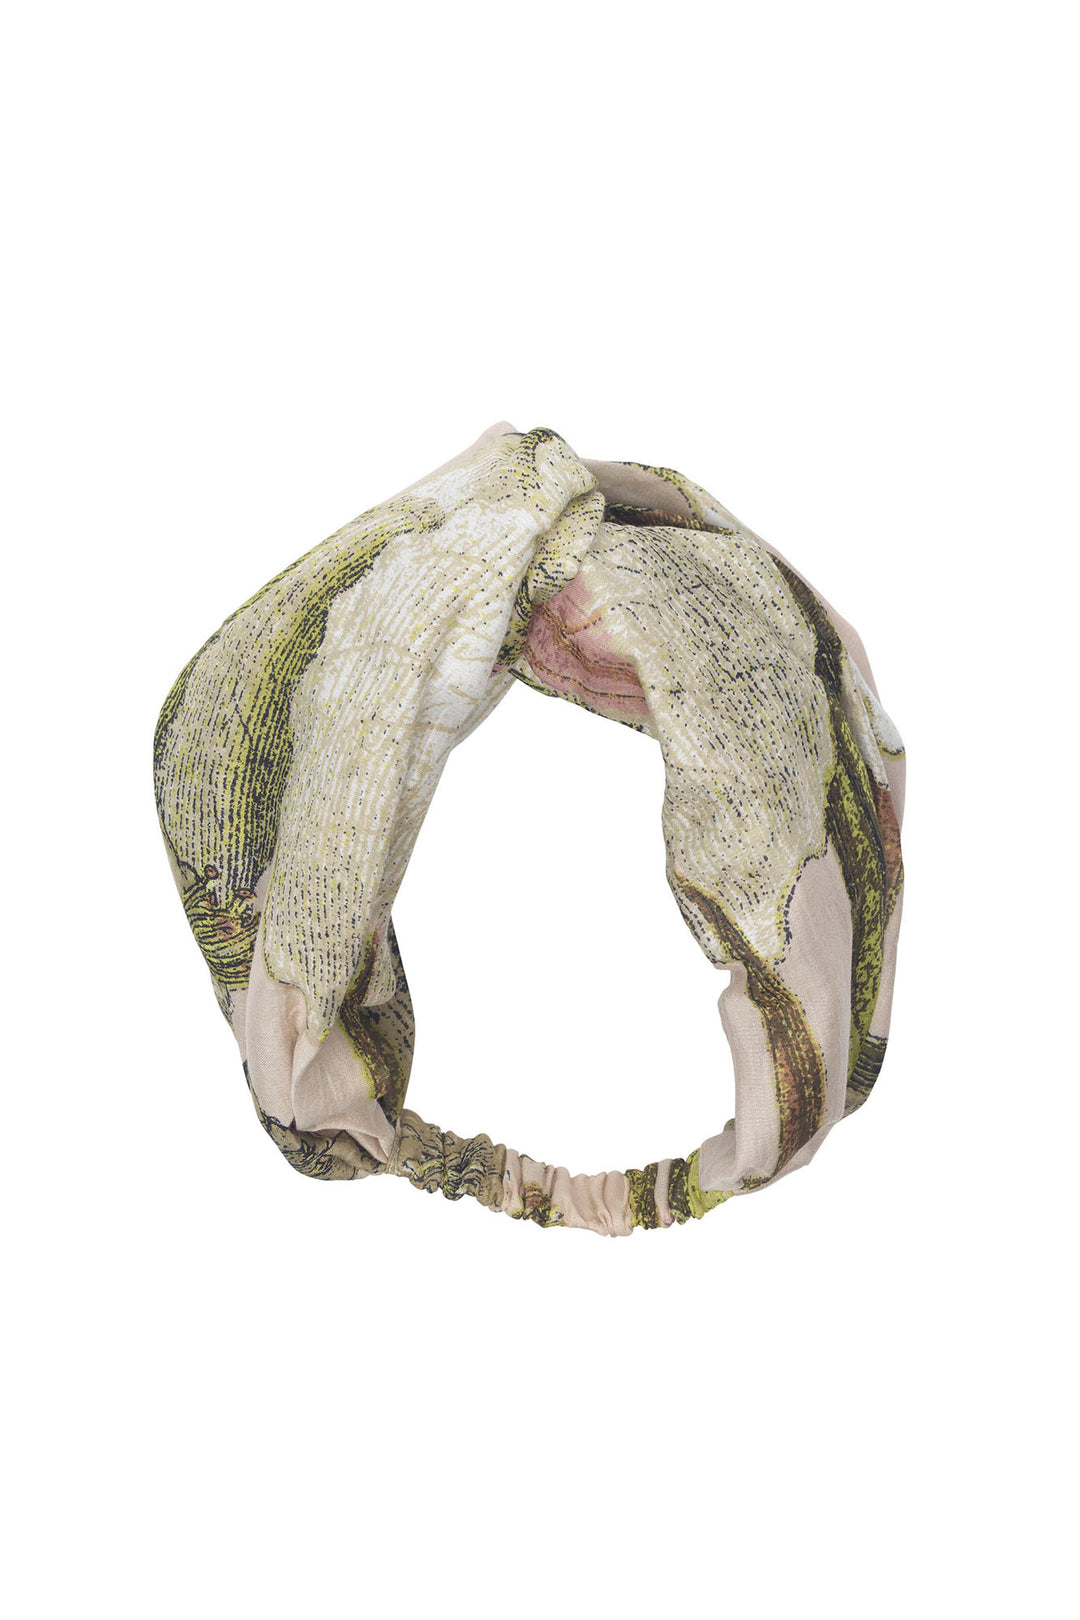 KEW Iris Blush Headband- Our headbands are made from 100% recycled material using offcuts from our clothing production.